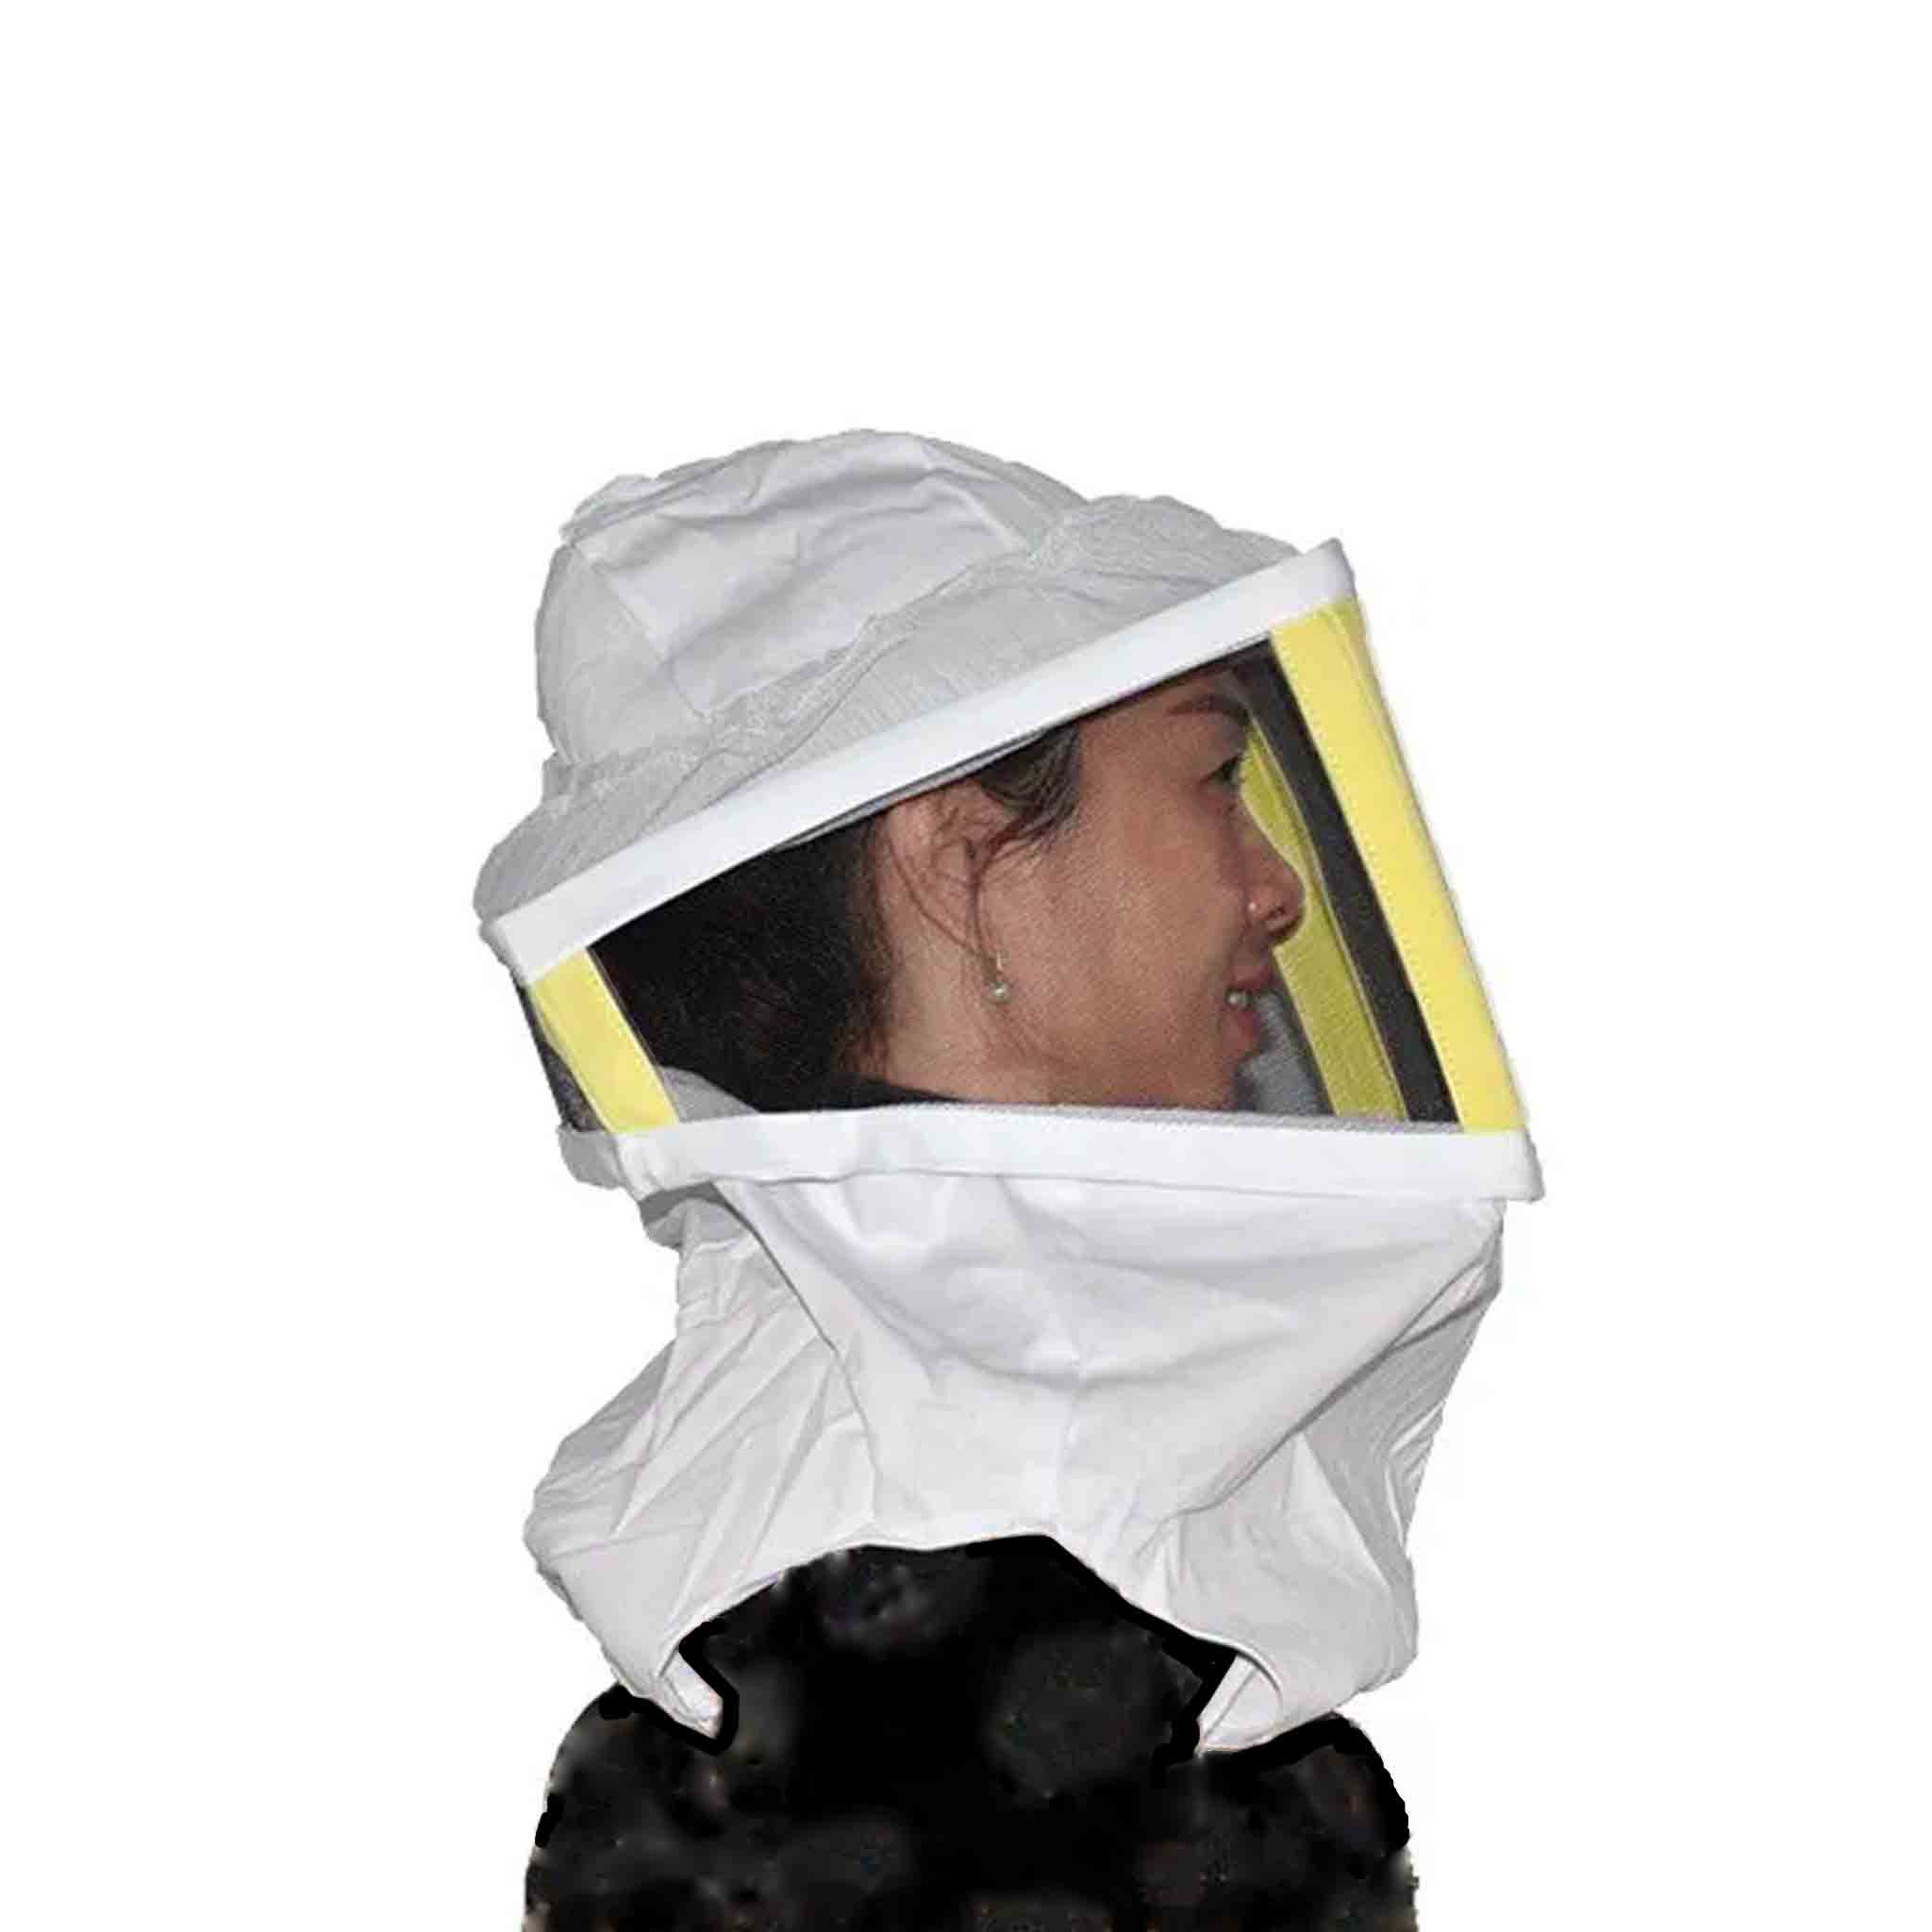 Beekeeping Protective Square Hat and Veil - Clothing collection by Buzzbee Beekeeping Supplies